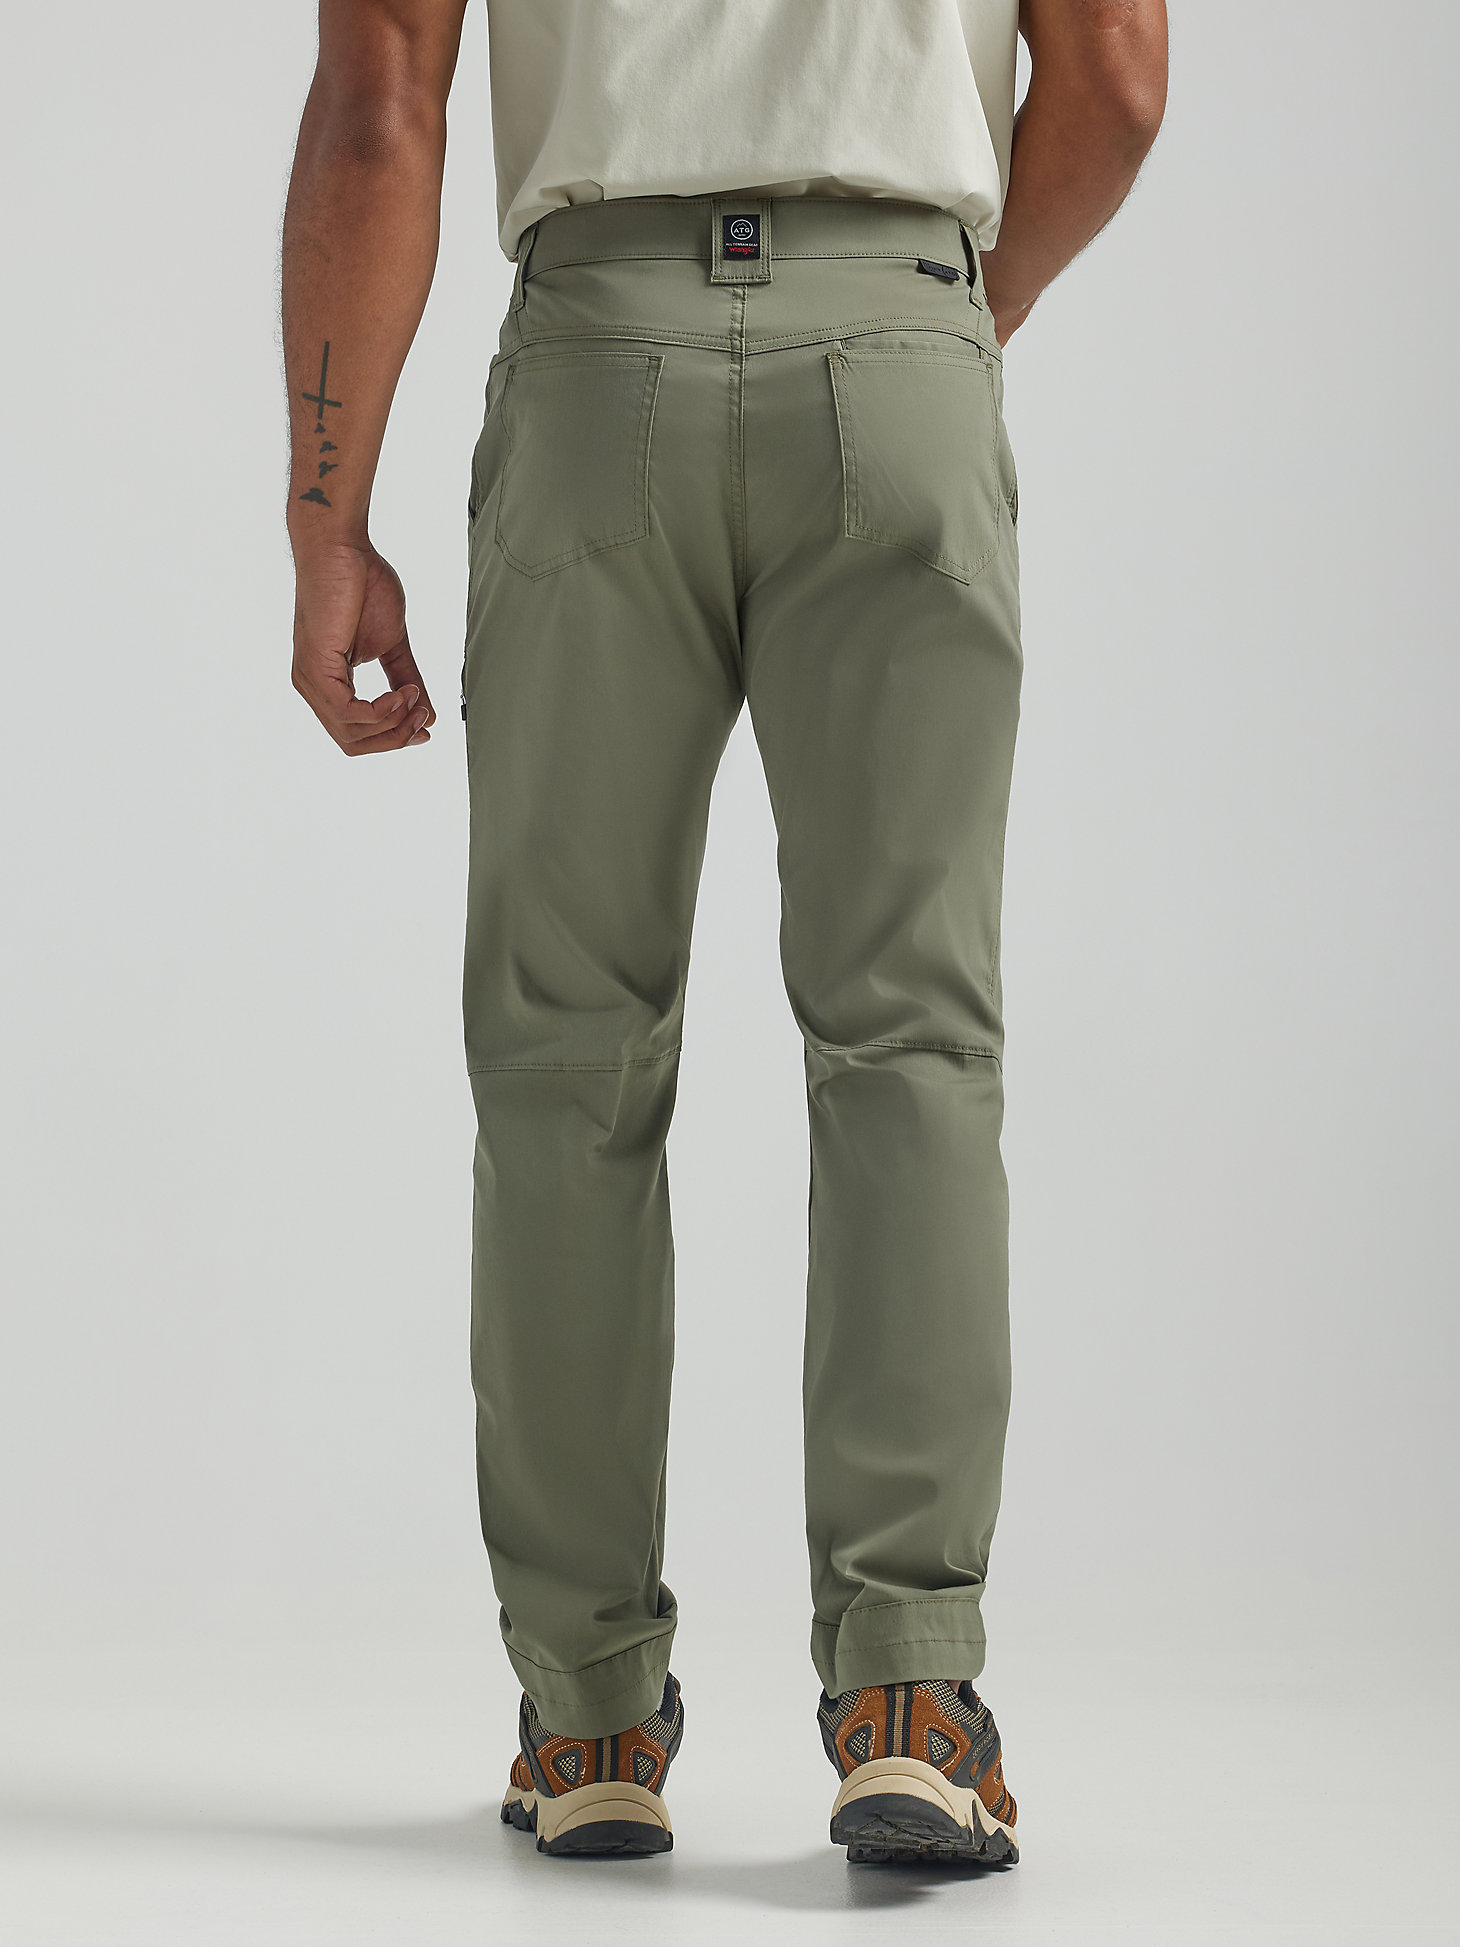 Sustainable Utility Pant in Dusty Olive alternative view 2